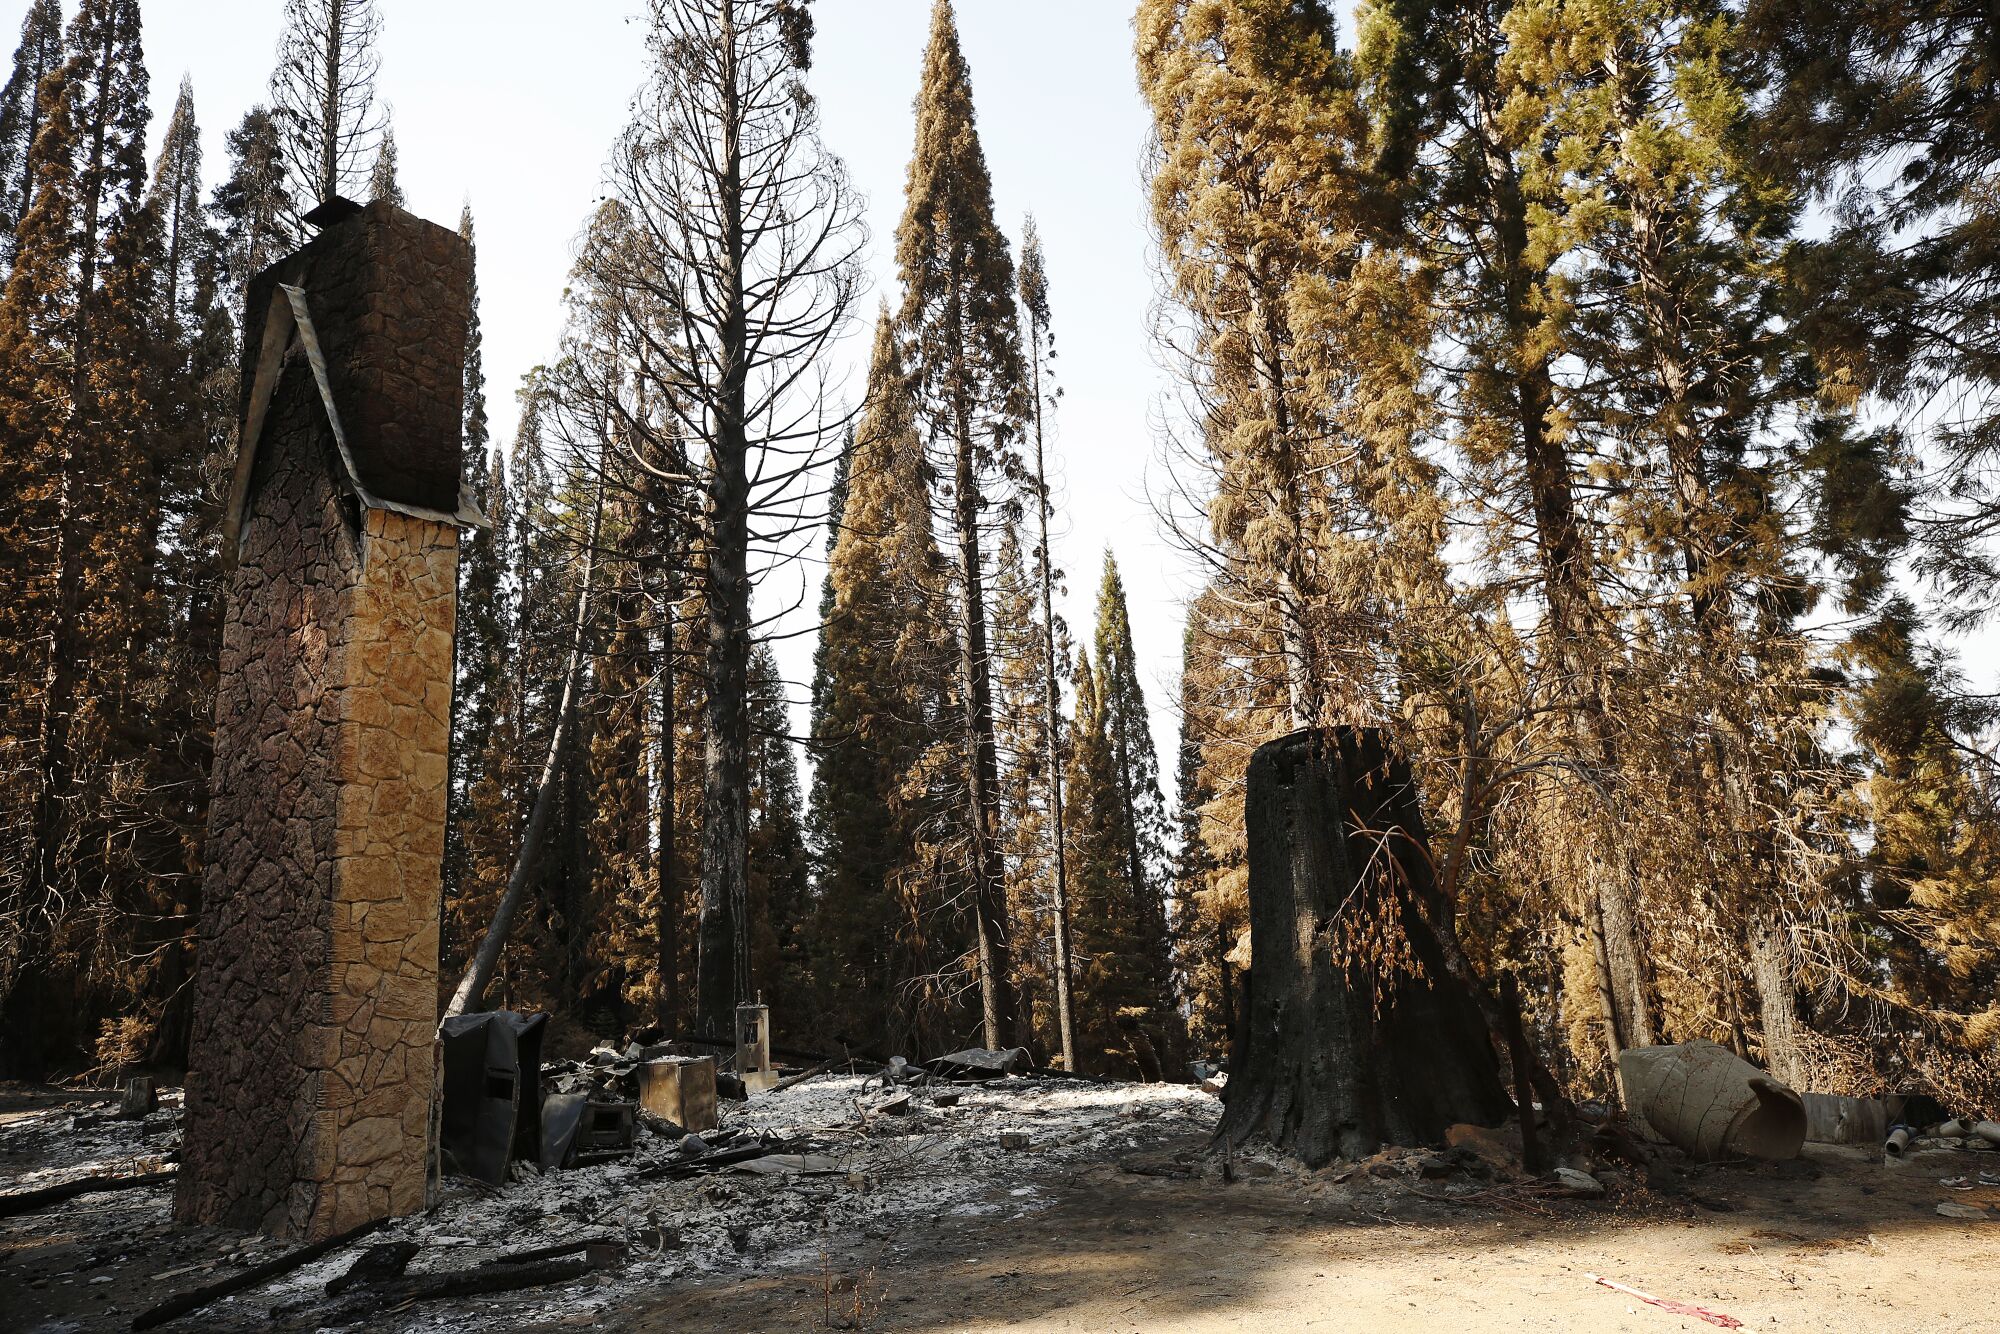 A chimney stands amid charred ash in the middle of a grove of sequoia trees